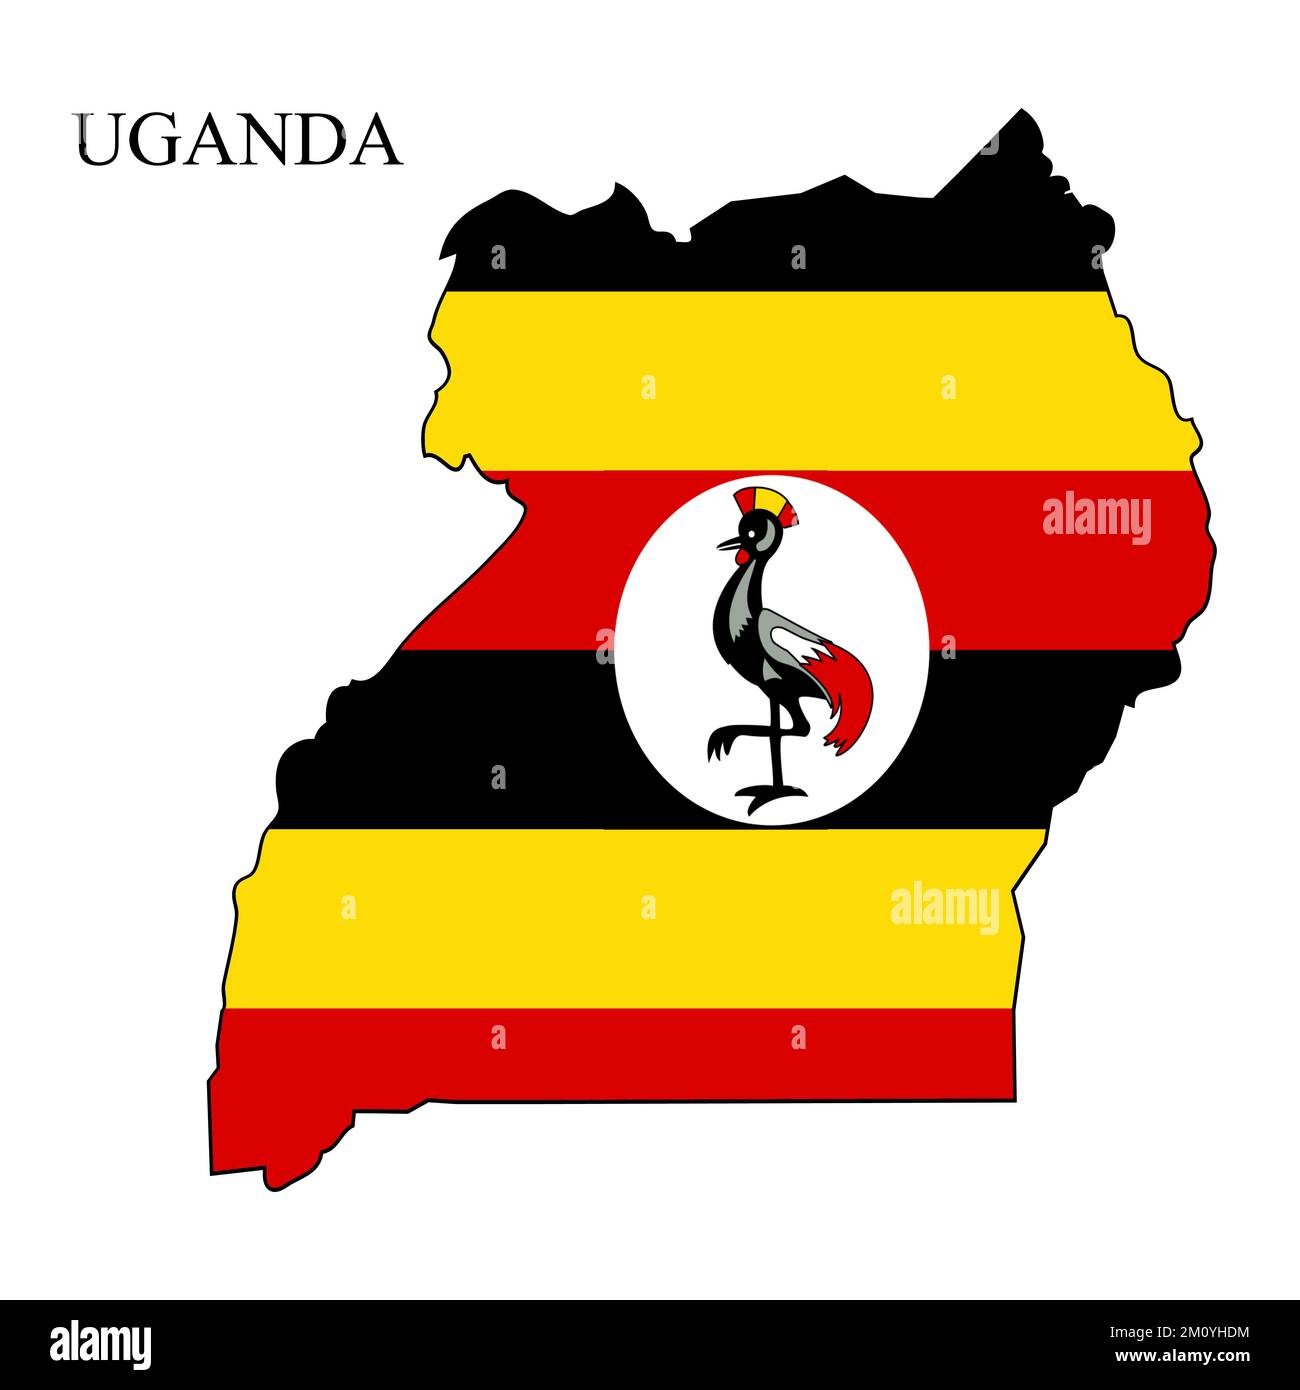 Uganda map vector illustration. Global economy. Famous country. Eastern Africa. Africa. Stock Vector